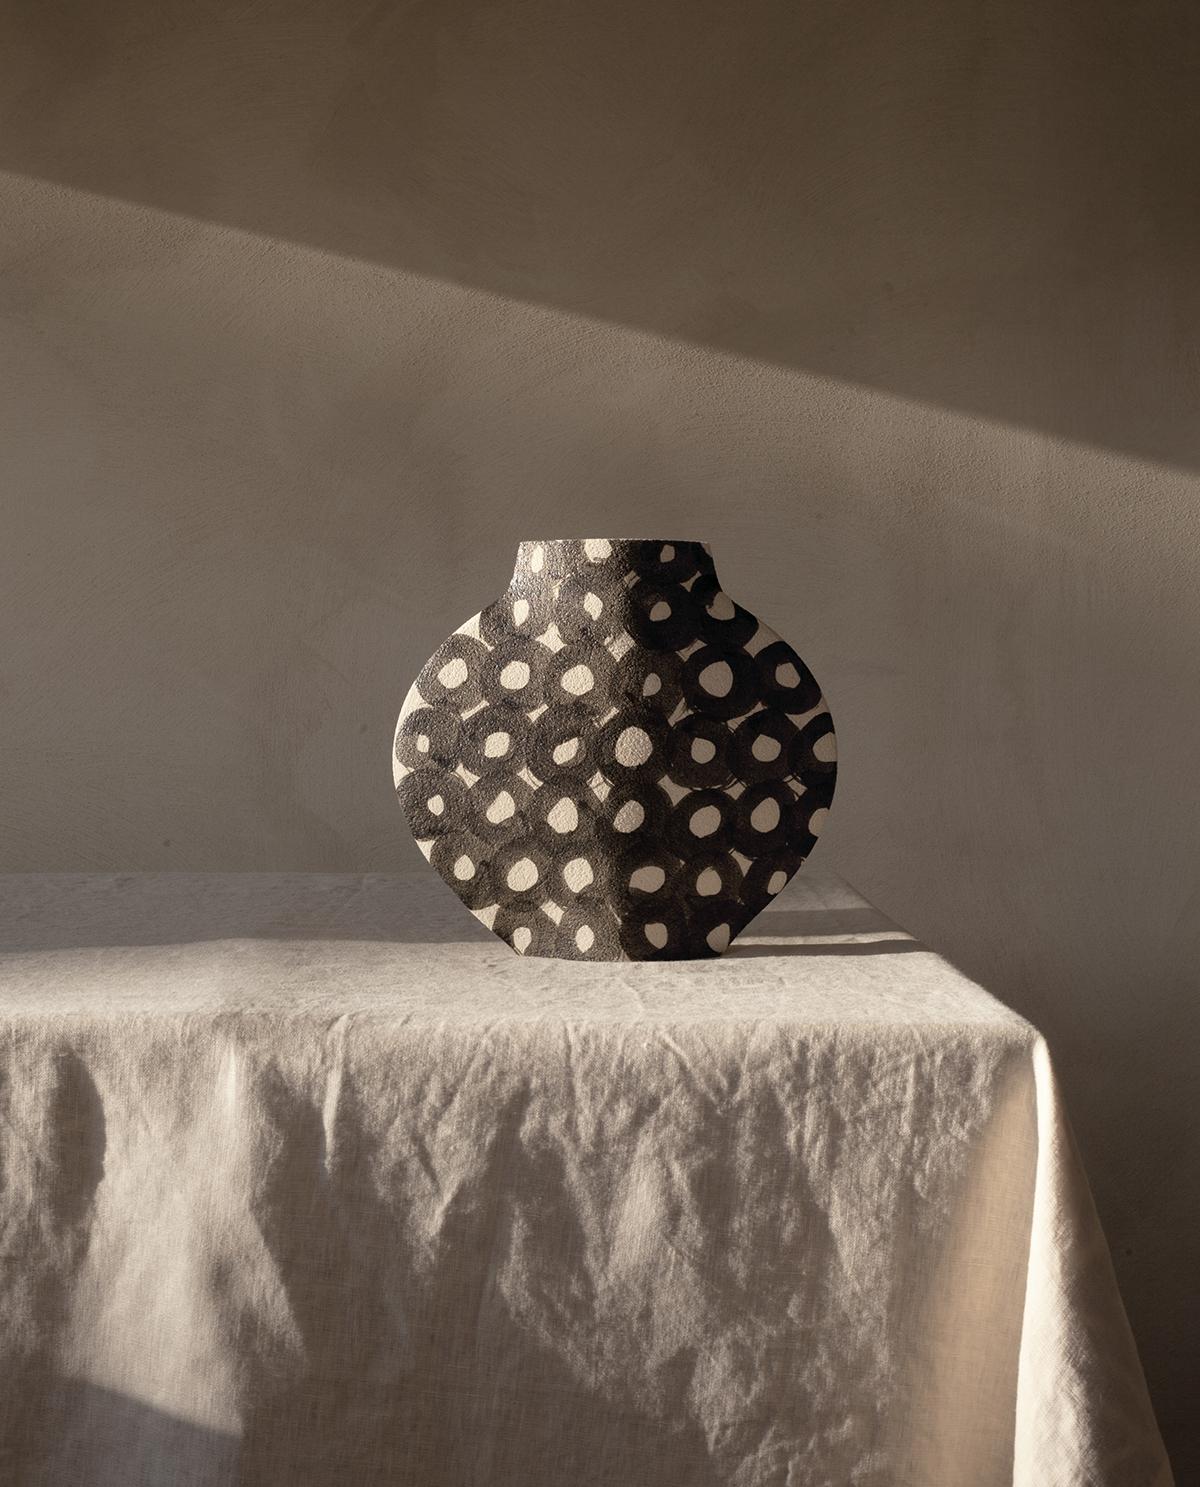 21st Century 'Rounds Pattern' Vase in White Ceramic, Hand-Crafted in France In New Condition For Sale In Marchaux-Chaudefontaine, FR